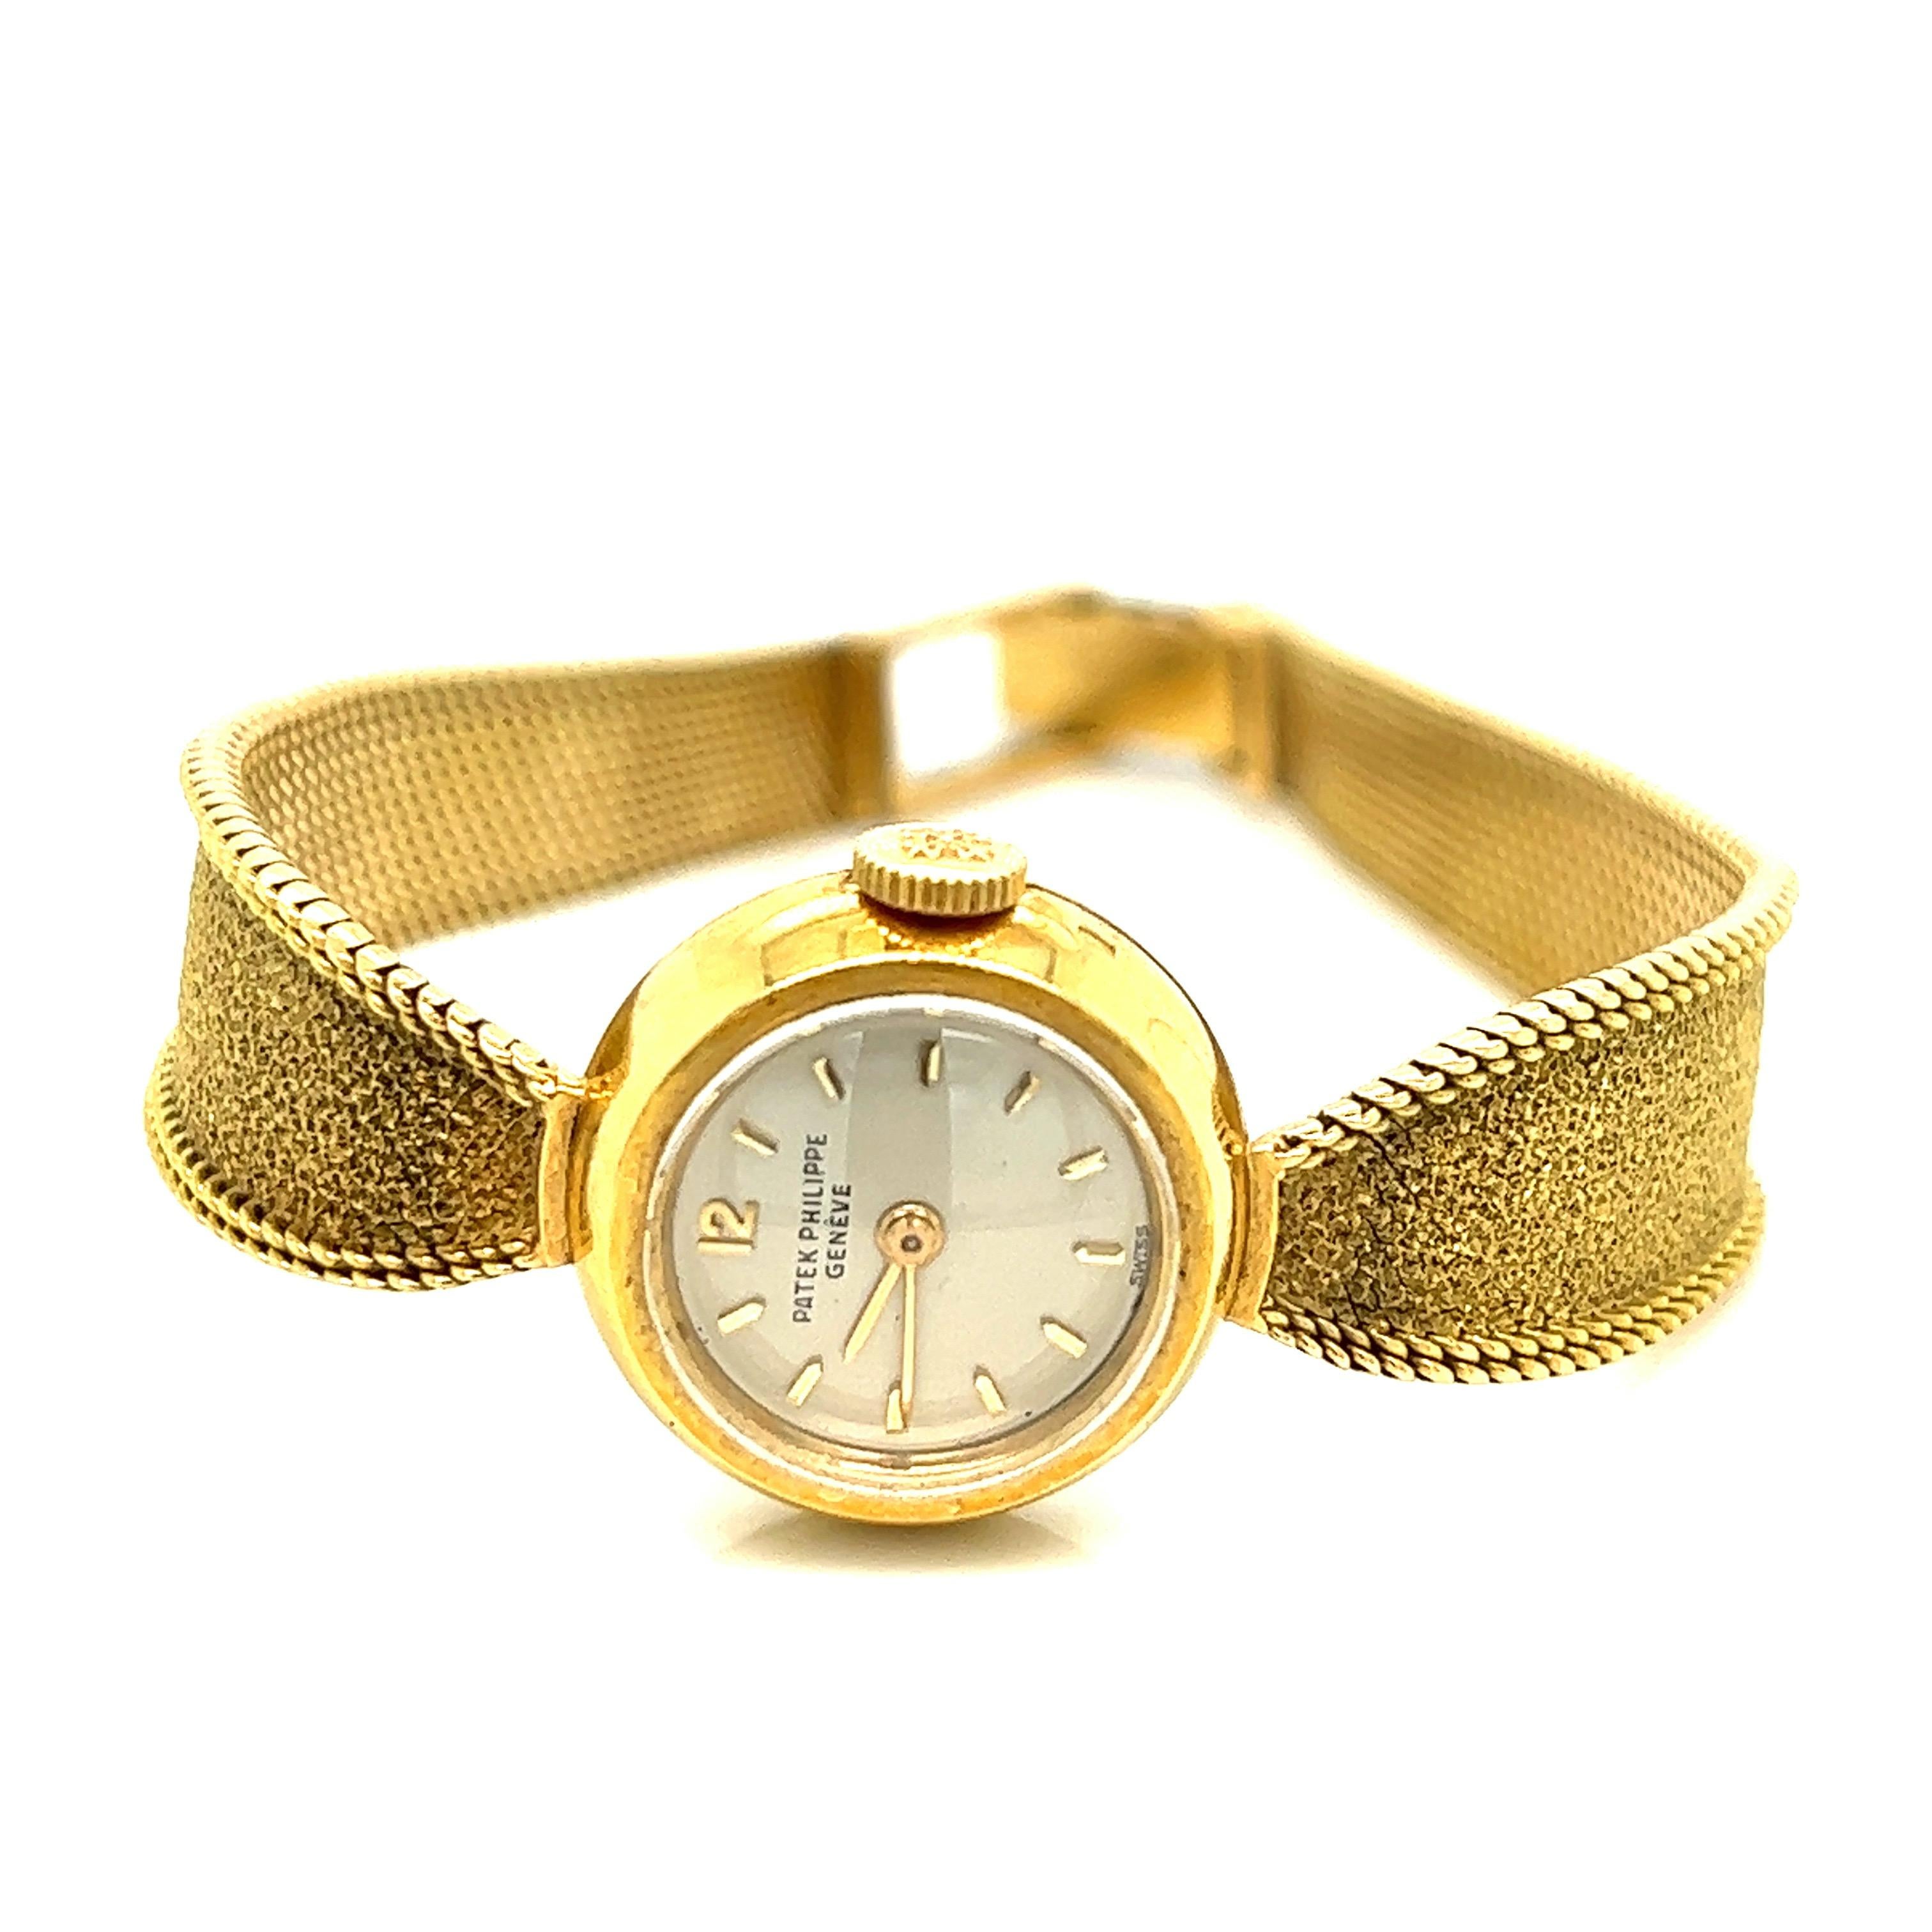 Patek Philippe lady's gold watch, Swiss

Mechanical manual wind movement, round case, silver dial with stick hour markers; integrated textured bracelet with gold over the clasp

Marked: Patek Philippe & Co., Geneve, 750, Swiss, Ref. 3006, 18